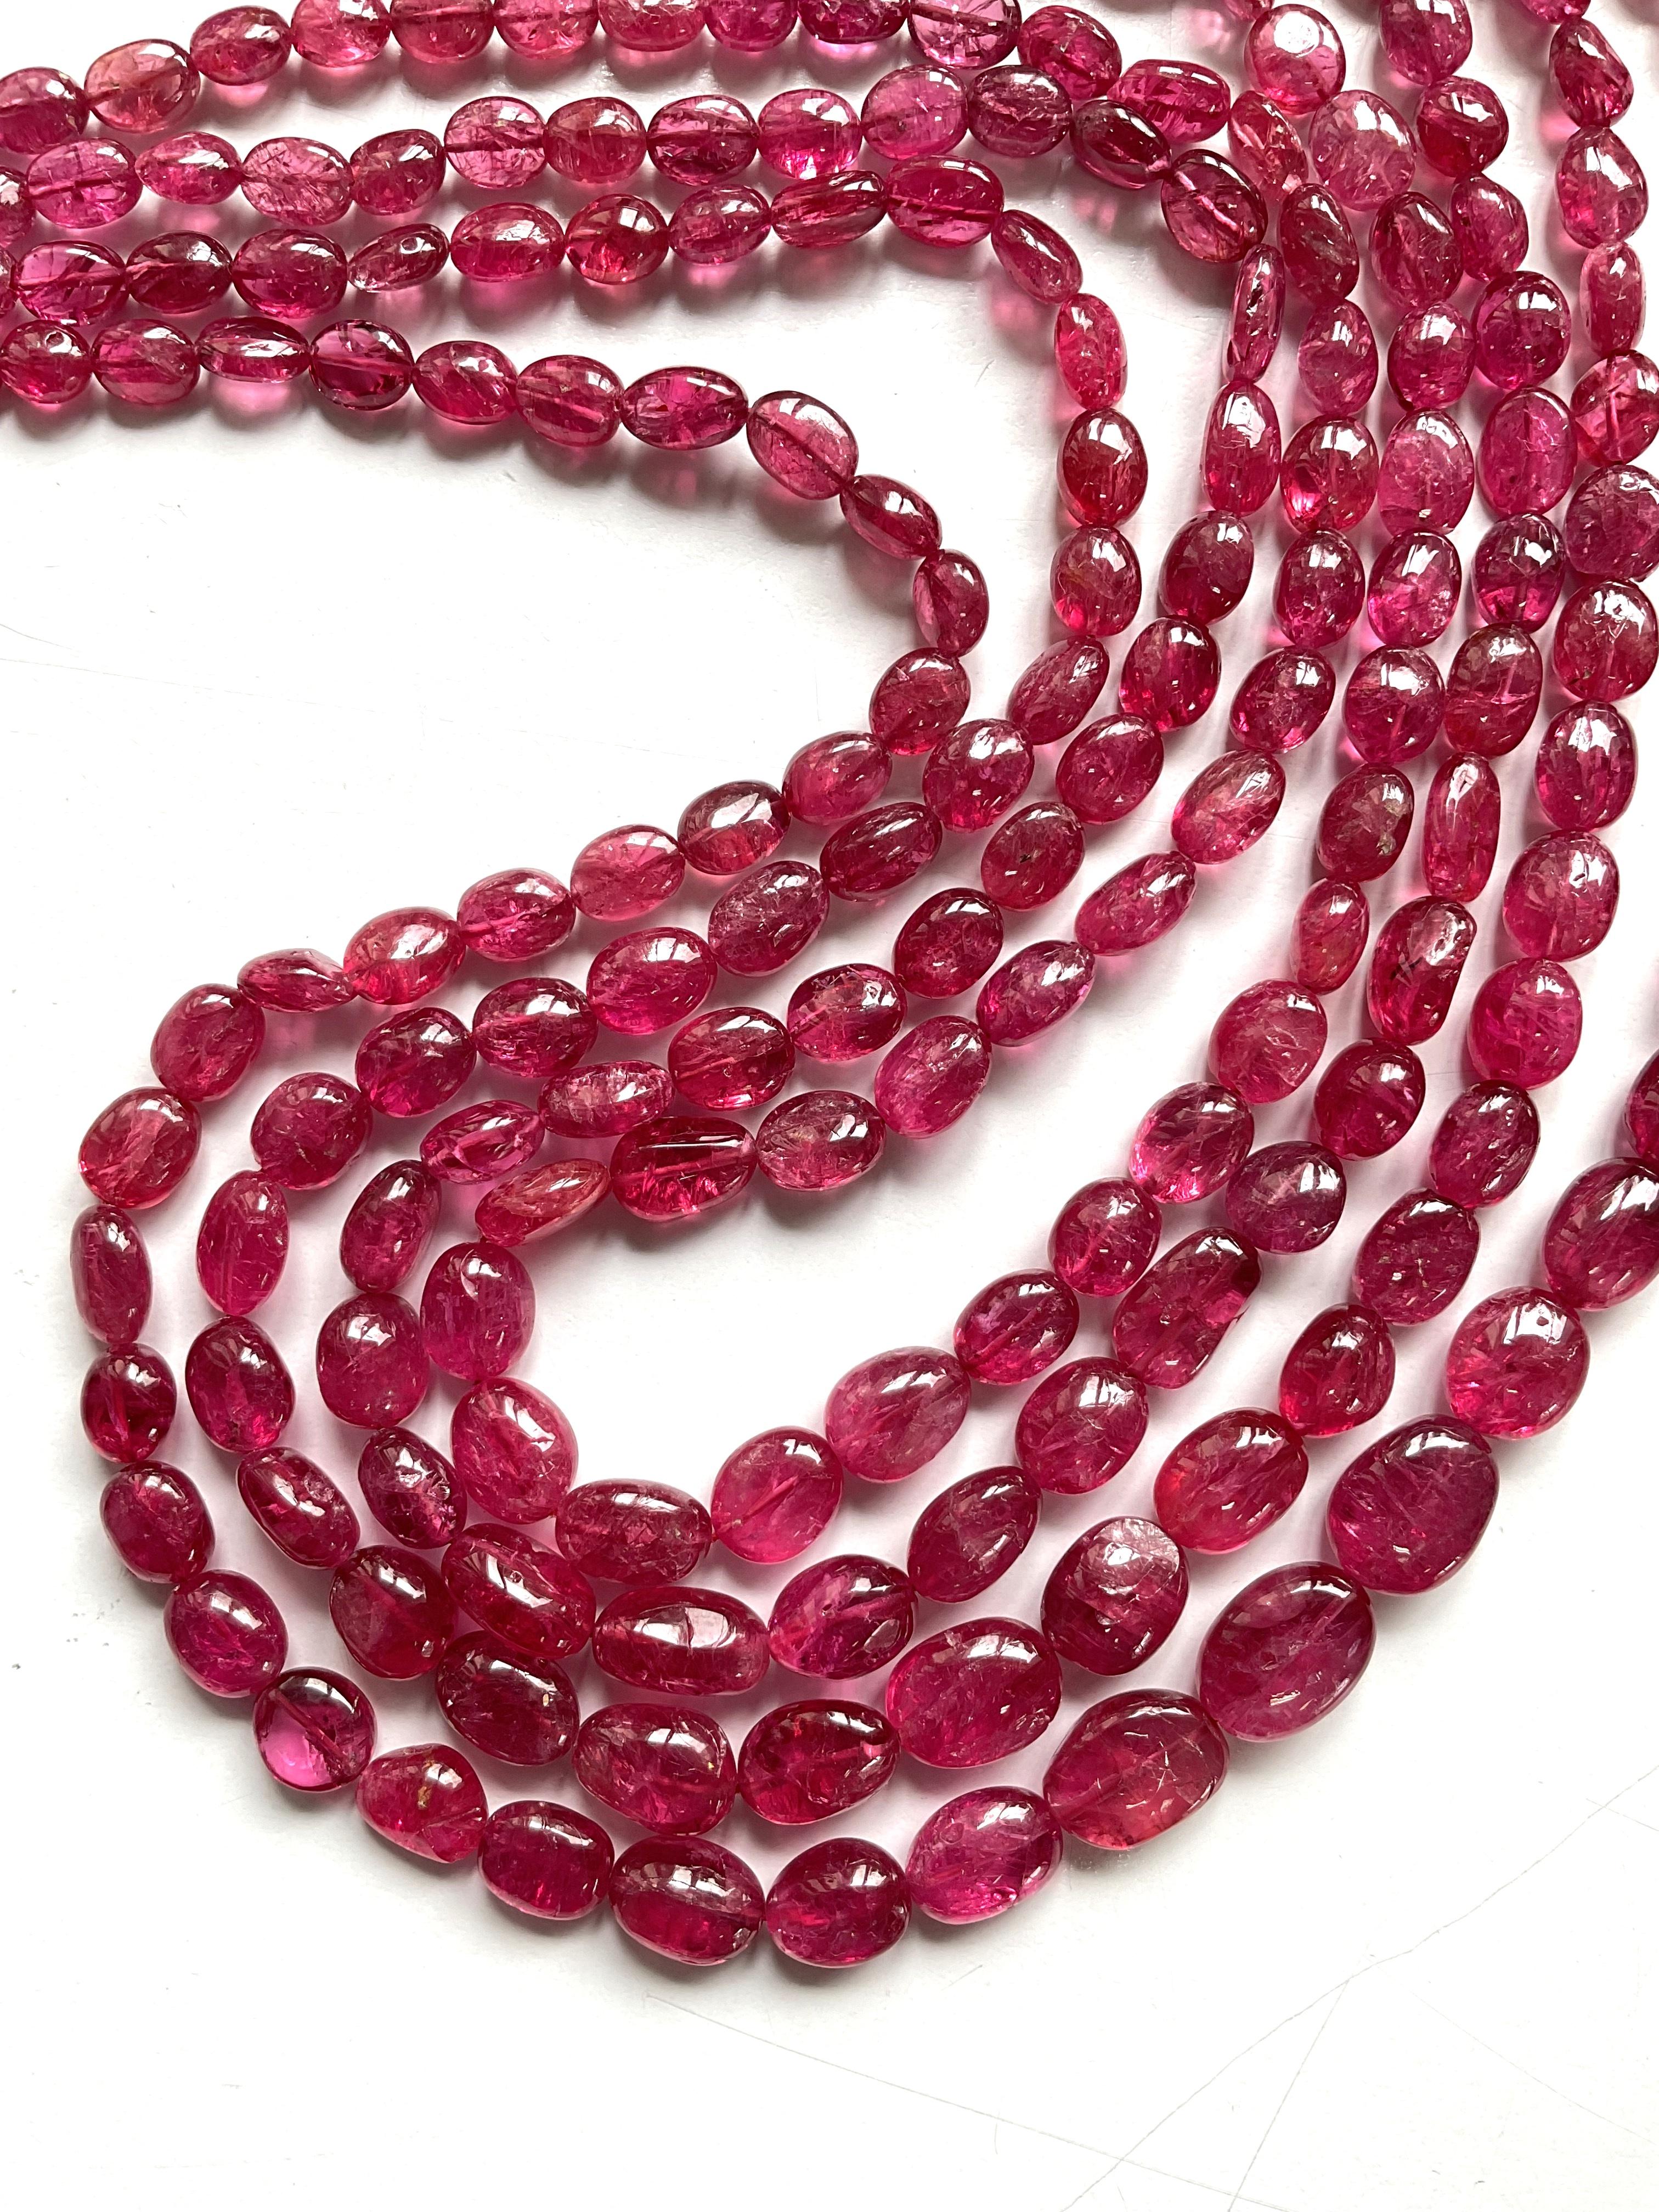 Women's or Men's 548.75 Carats Burma Red Spinel Top Quality Tumble Plain Natural Gemstone For Sale